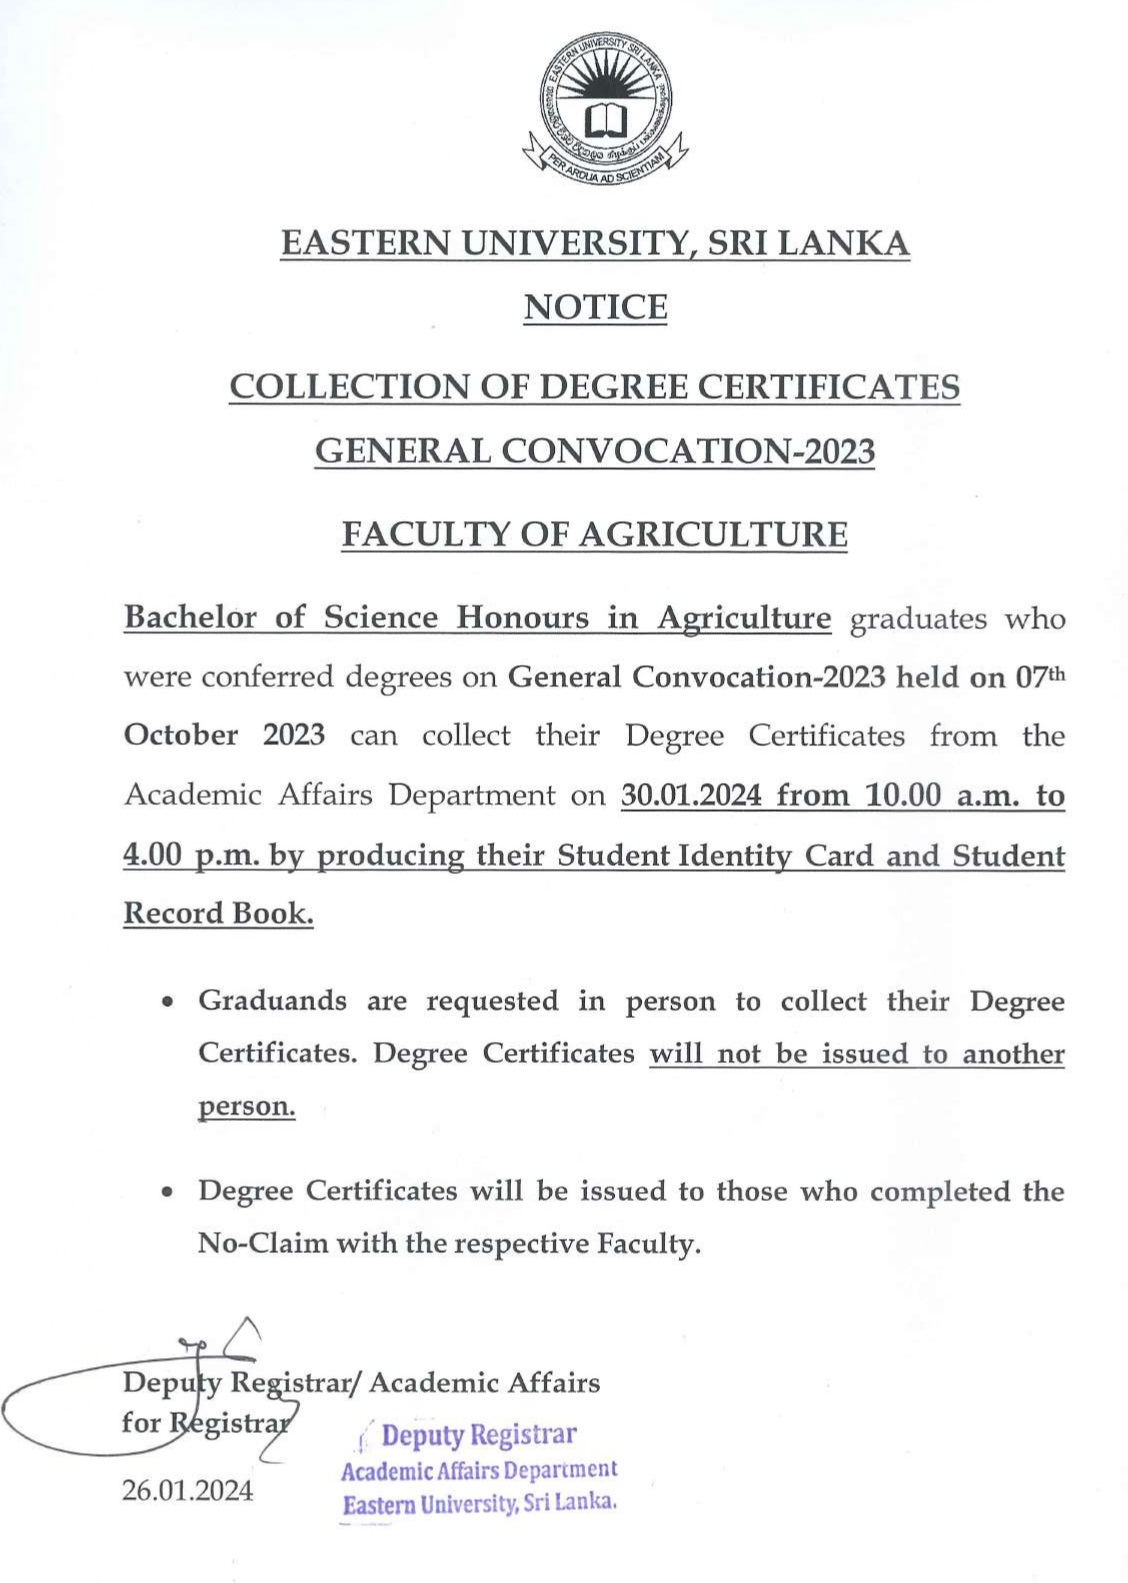  Faculty of Agriculture Issuing of Degree Certificates notice_page-0001.jpg